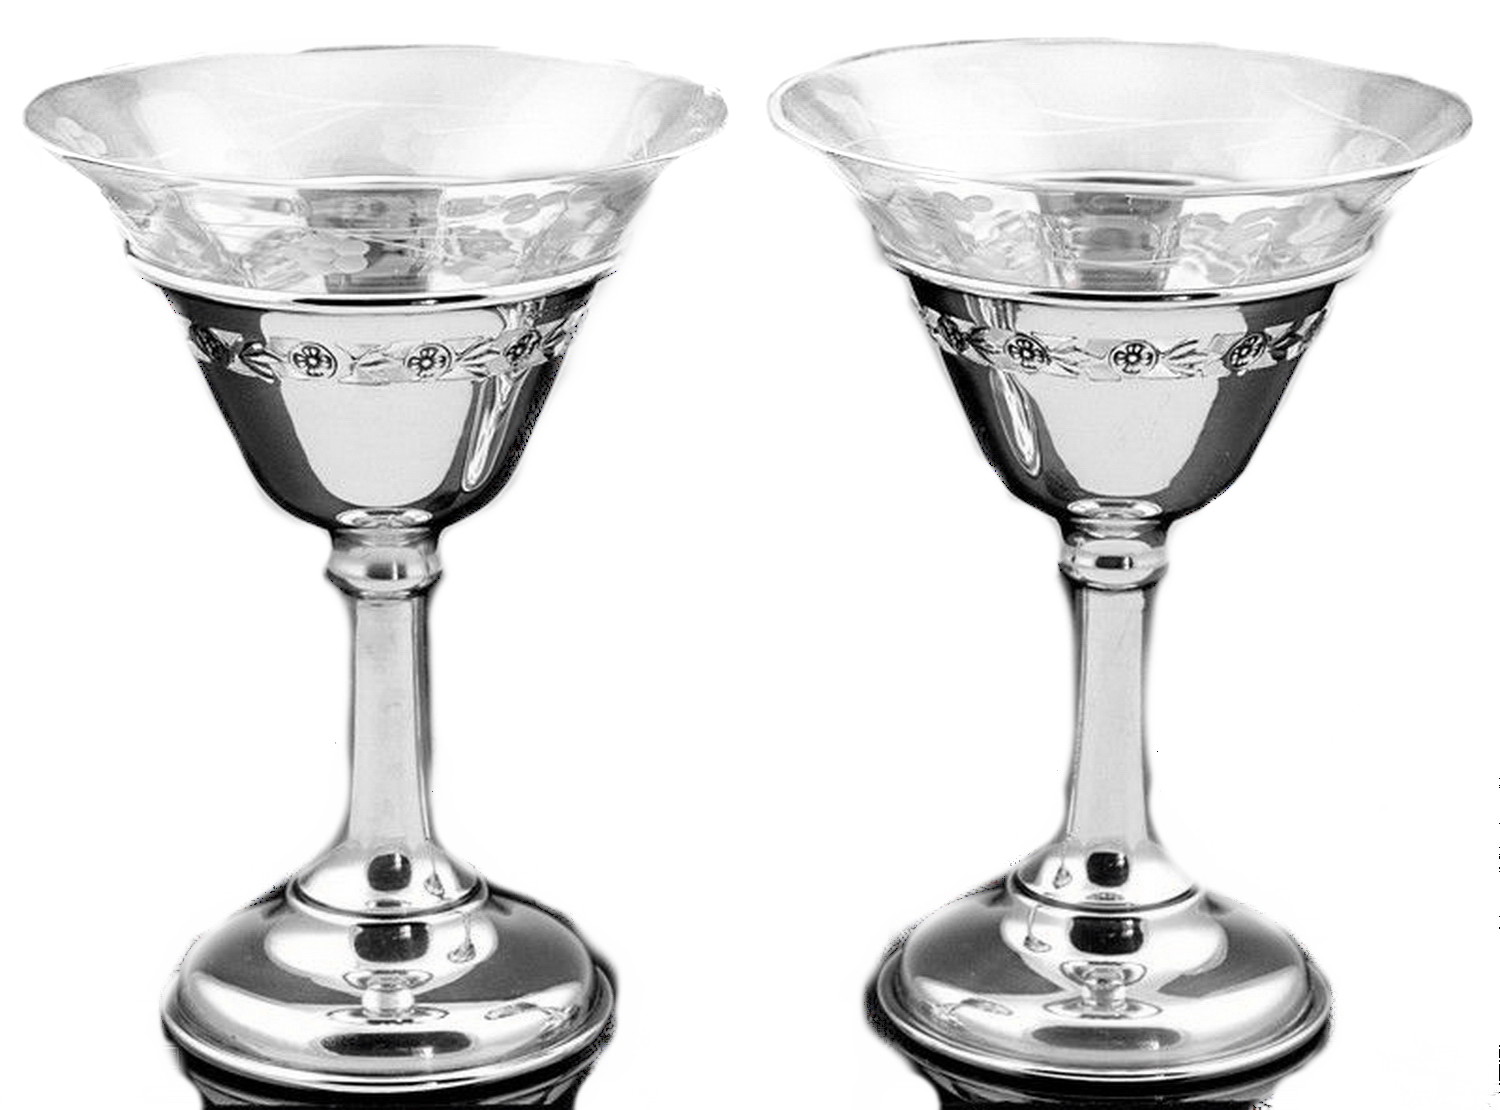 6 Art Deco Birks Silver Etched Crystal Champagne Coupe Glasses